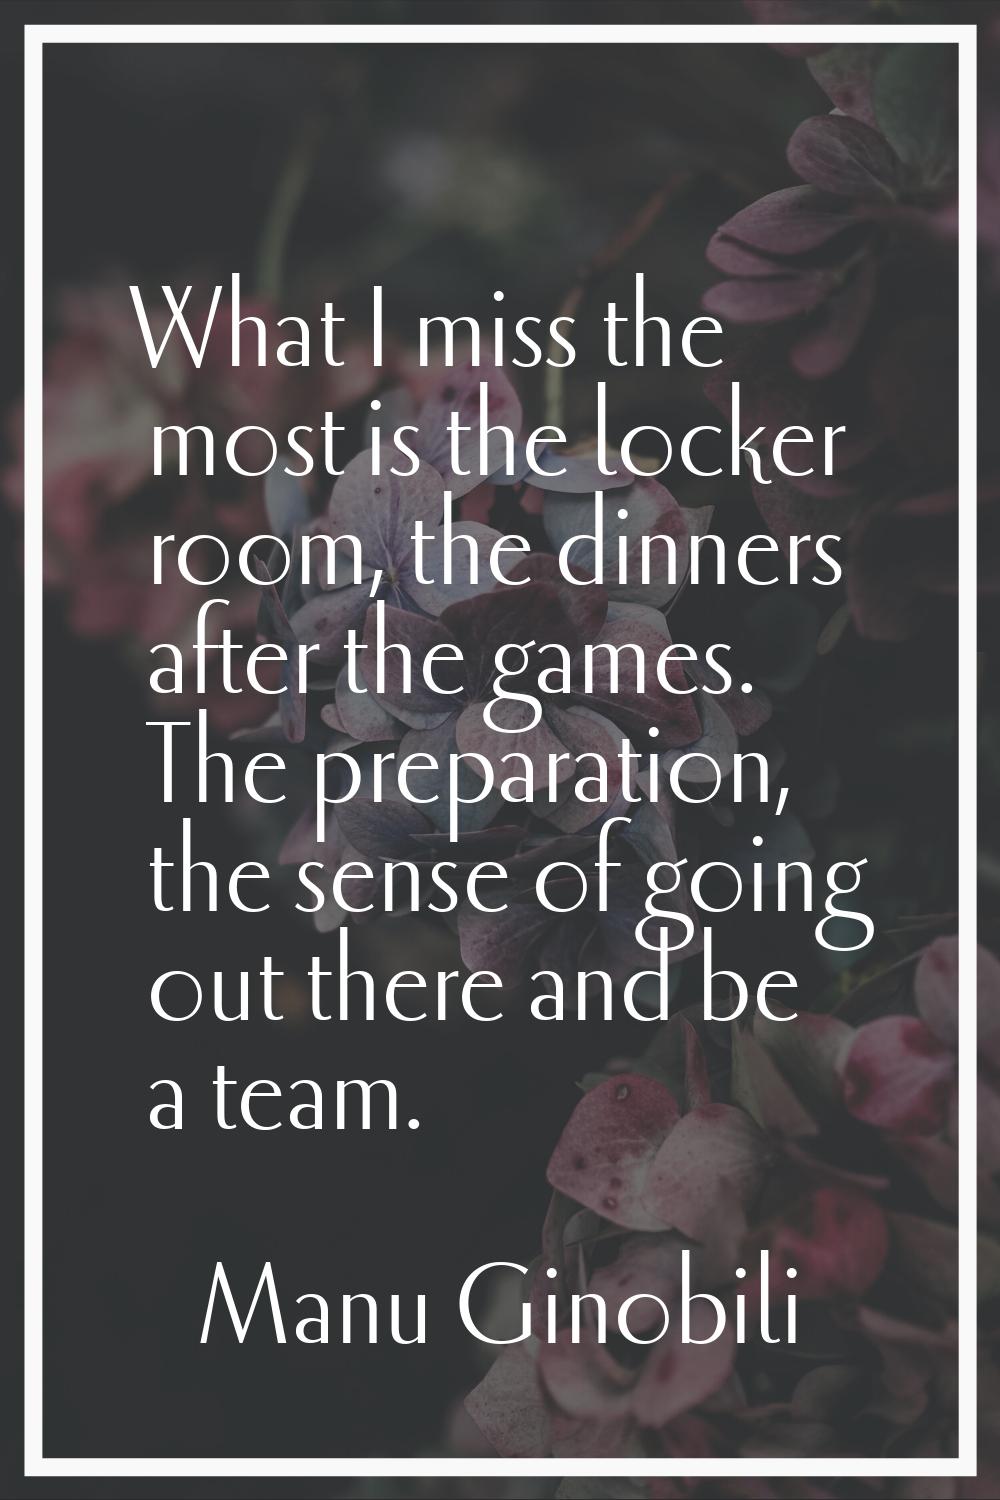 What I miss the most is the locker room, the dinners after the games. The preparation, the sense of